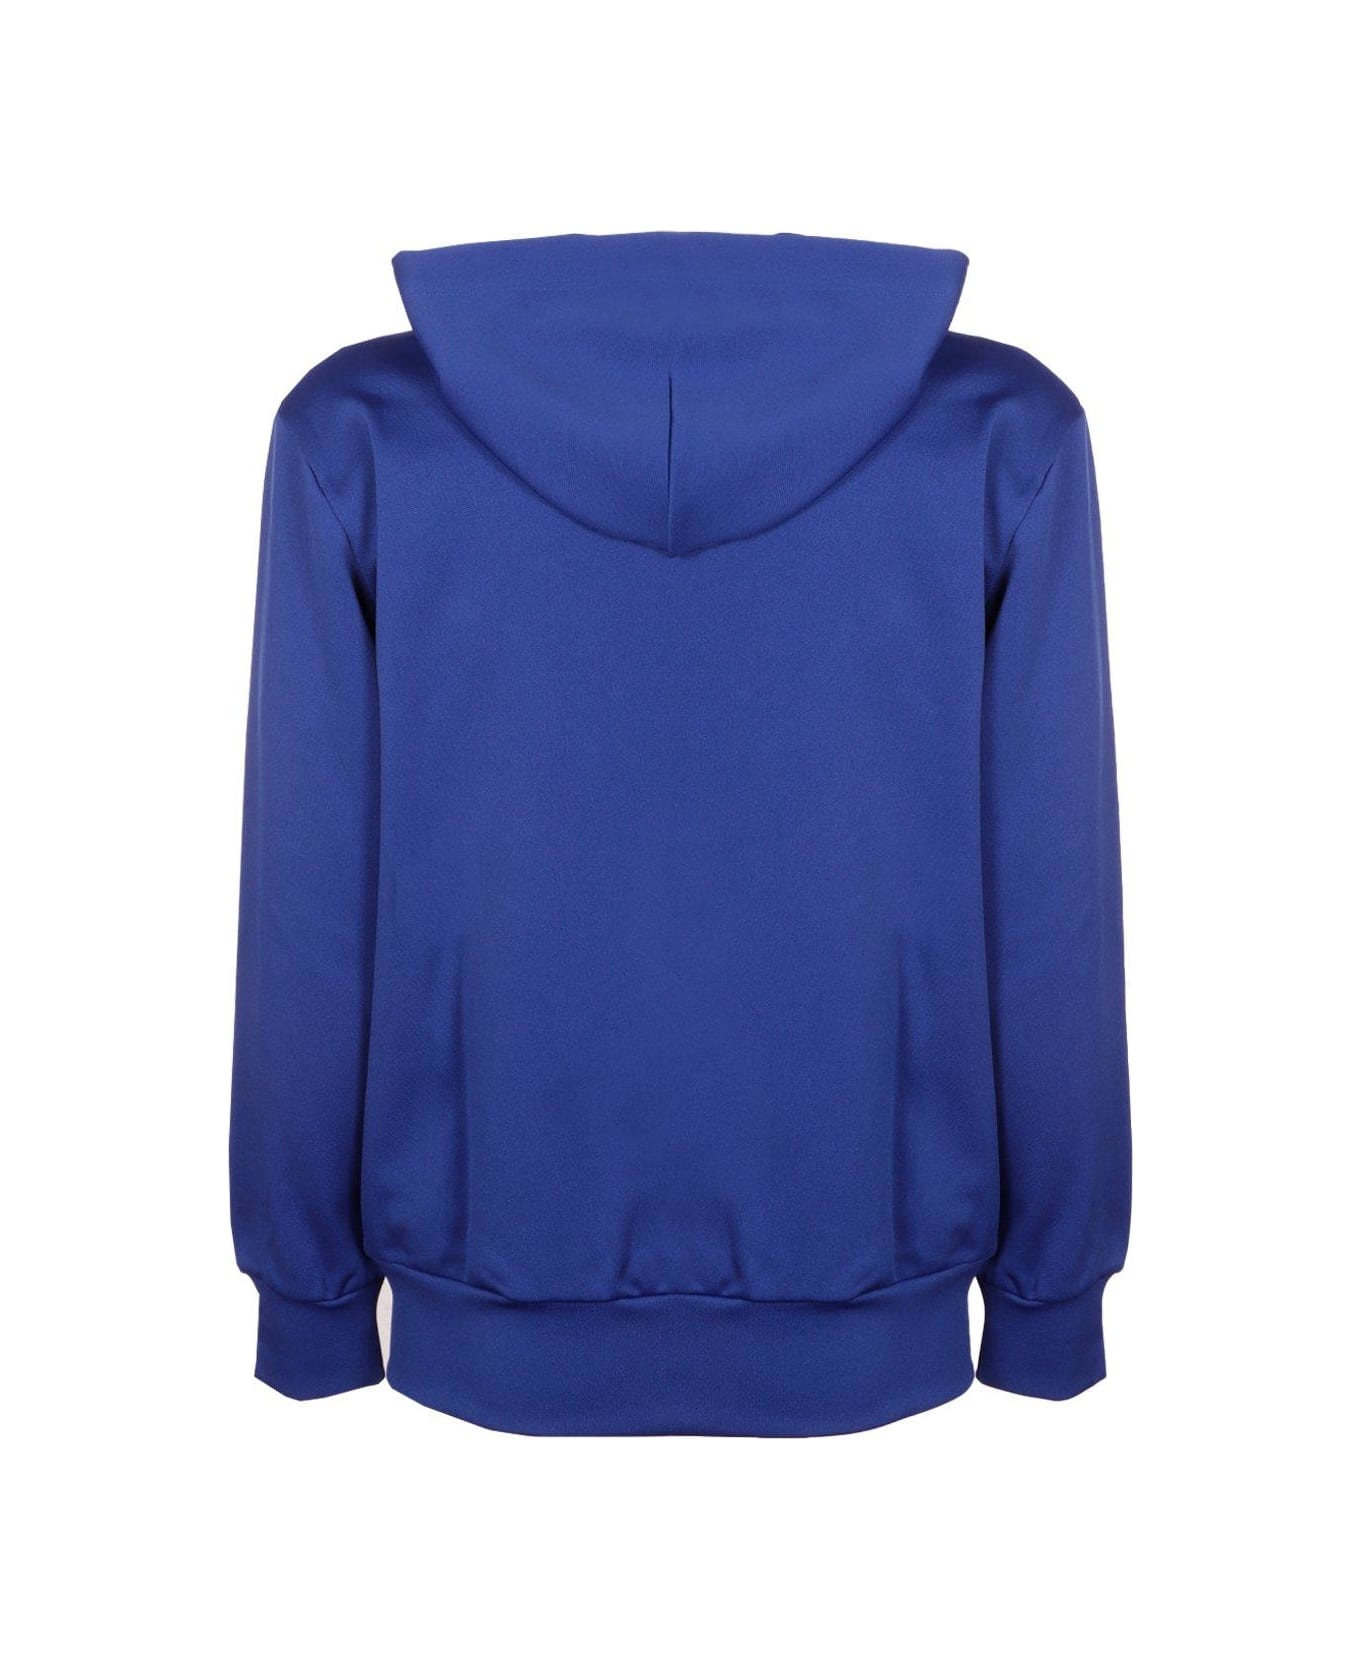 Comme des Garçons Play Heart Embroidered Hoodie - Navy